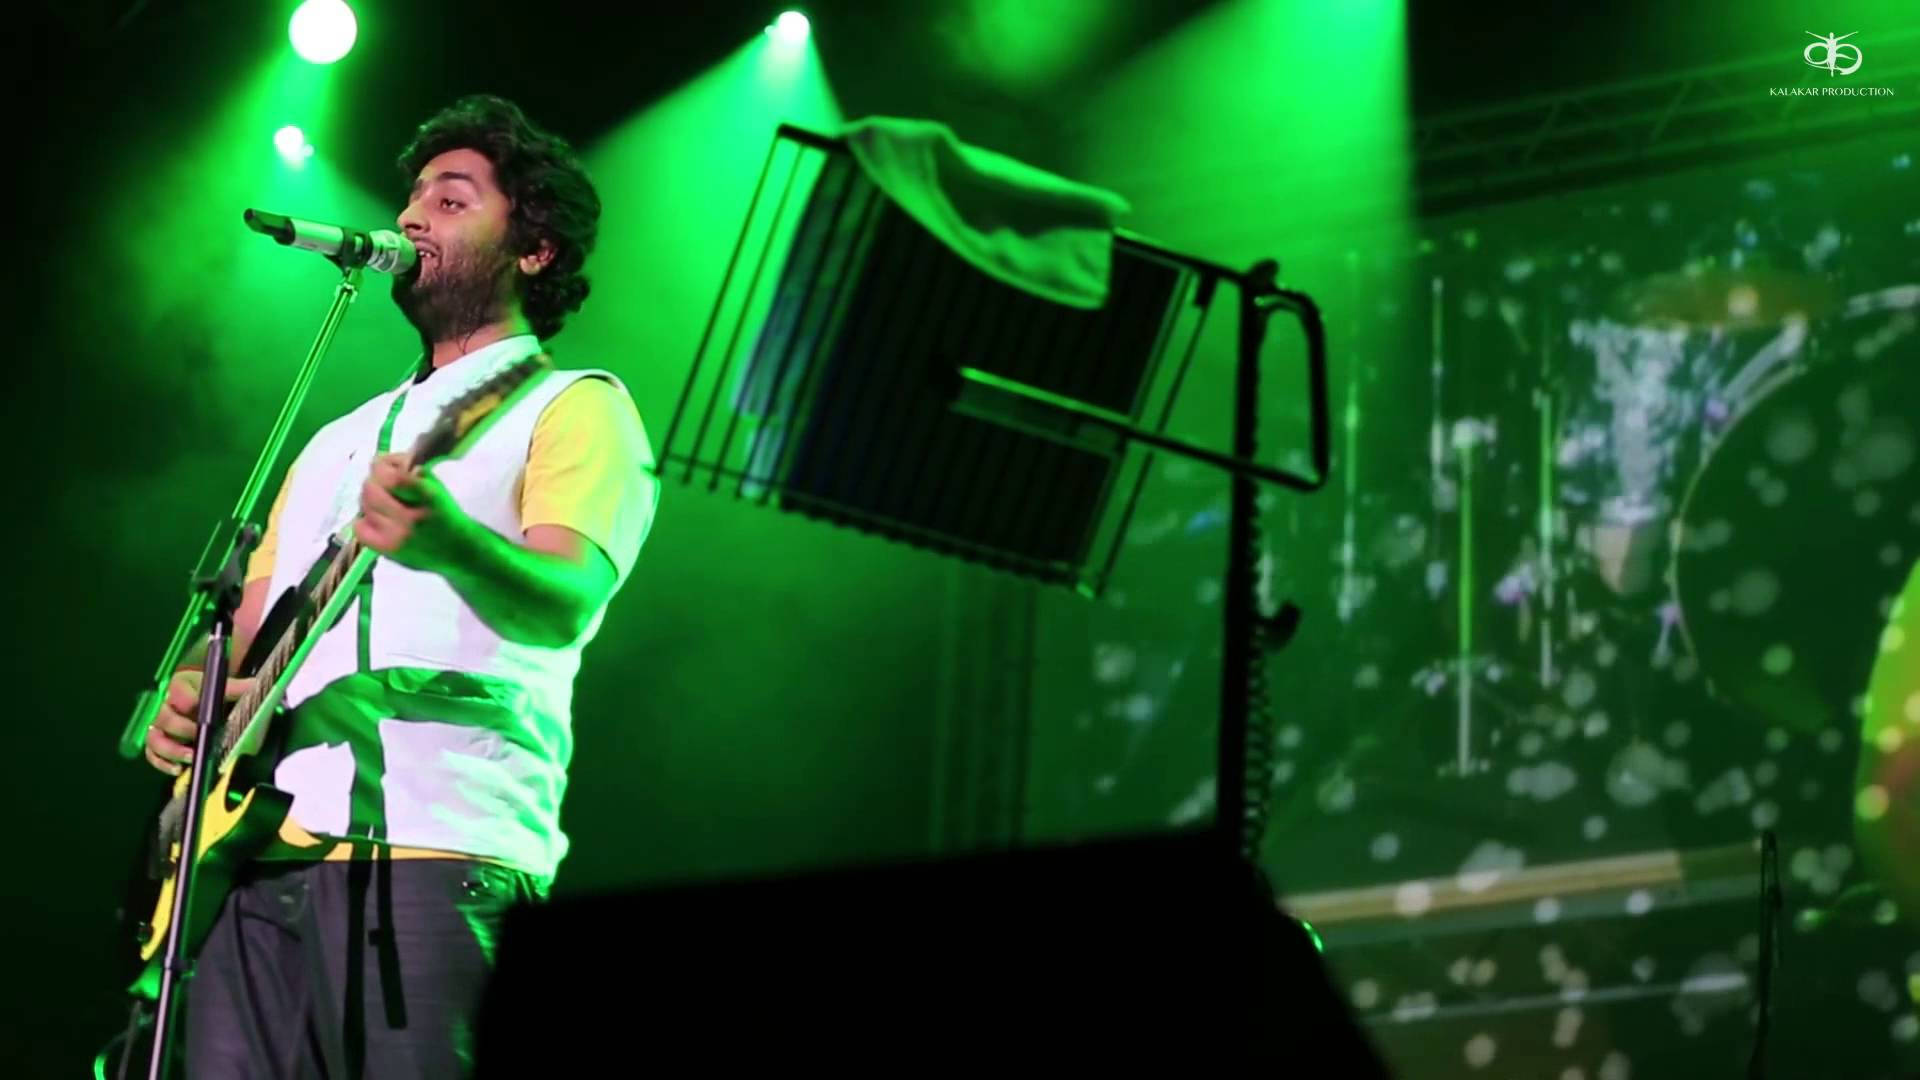 Indian Singer Arijit Singh On A Green Stage Wallpaper